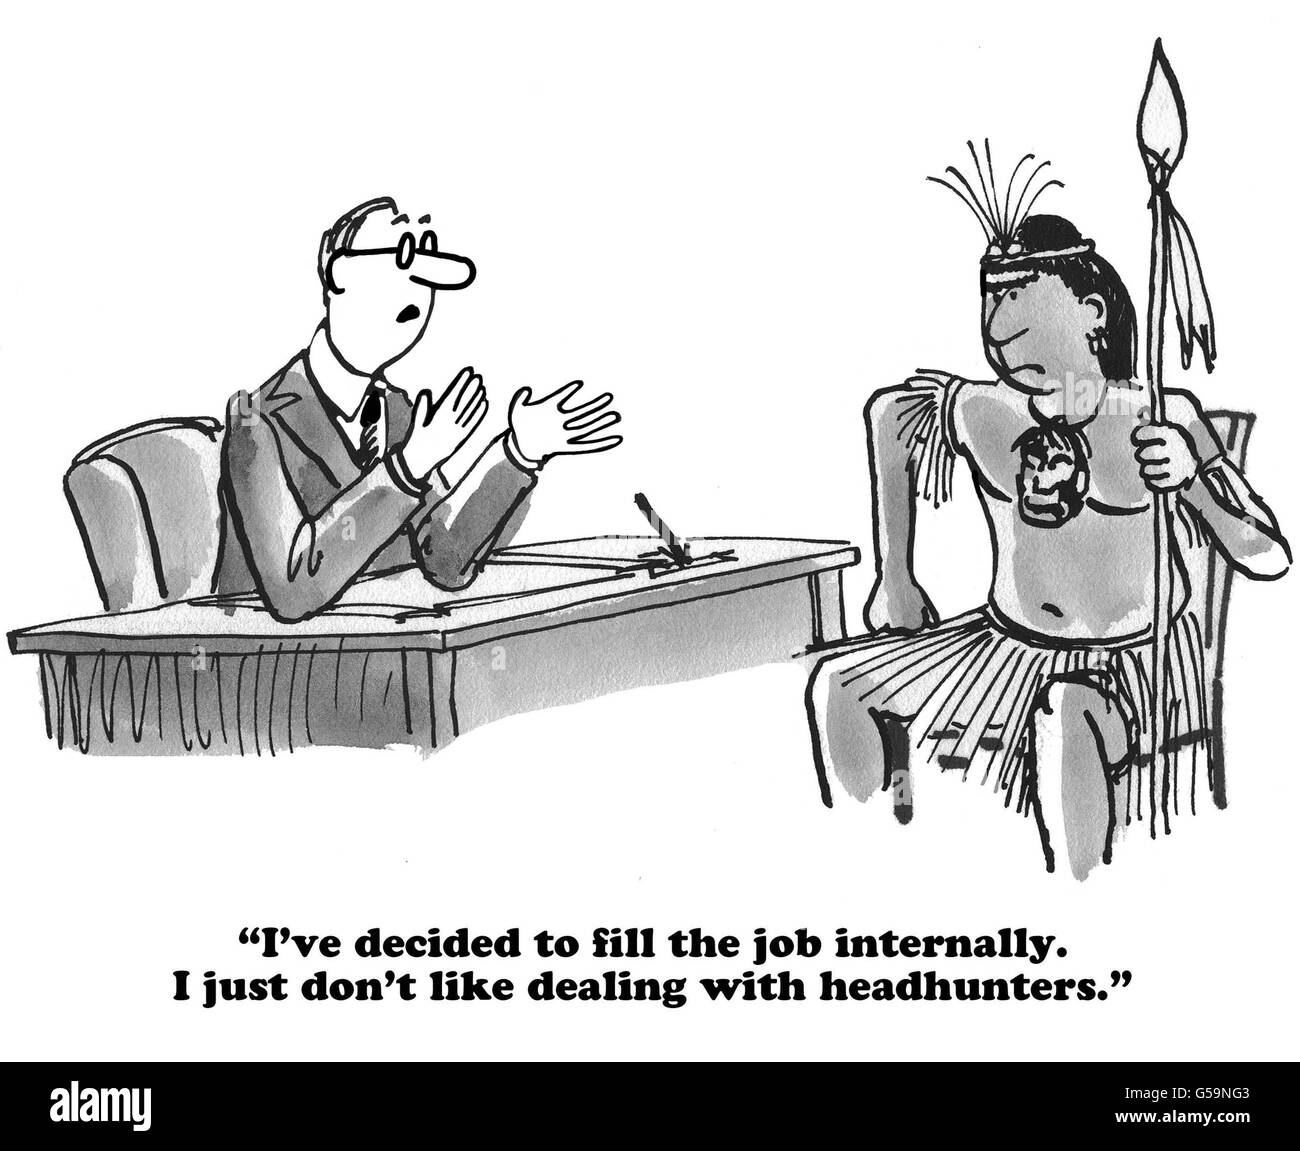 Business cartoon about filling a job internally rather than work with headhunters. Stock Photo